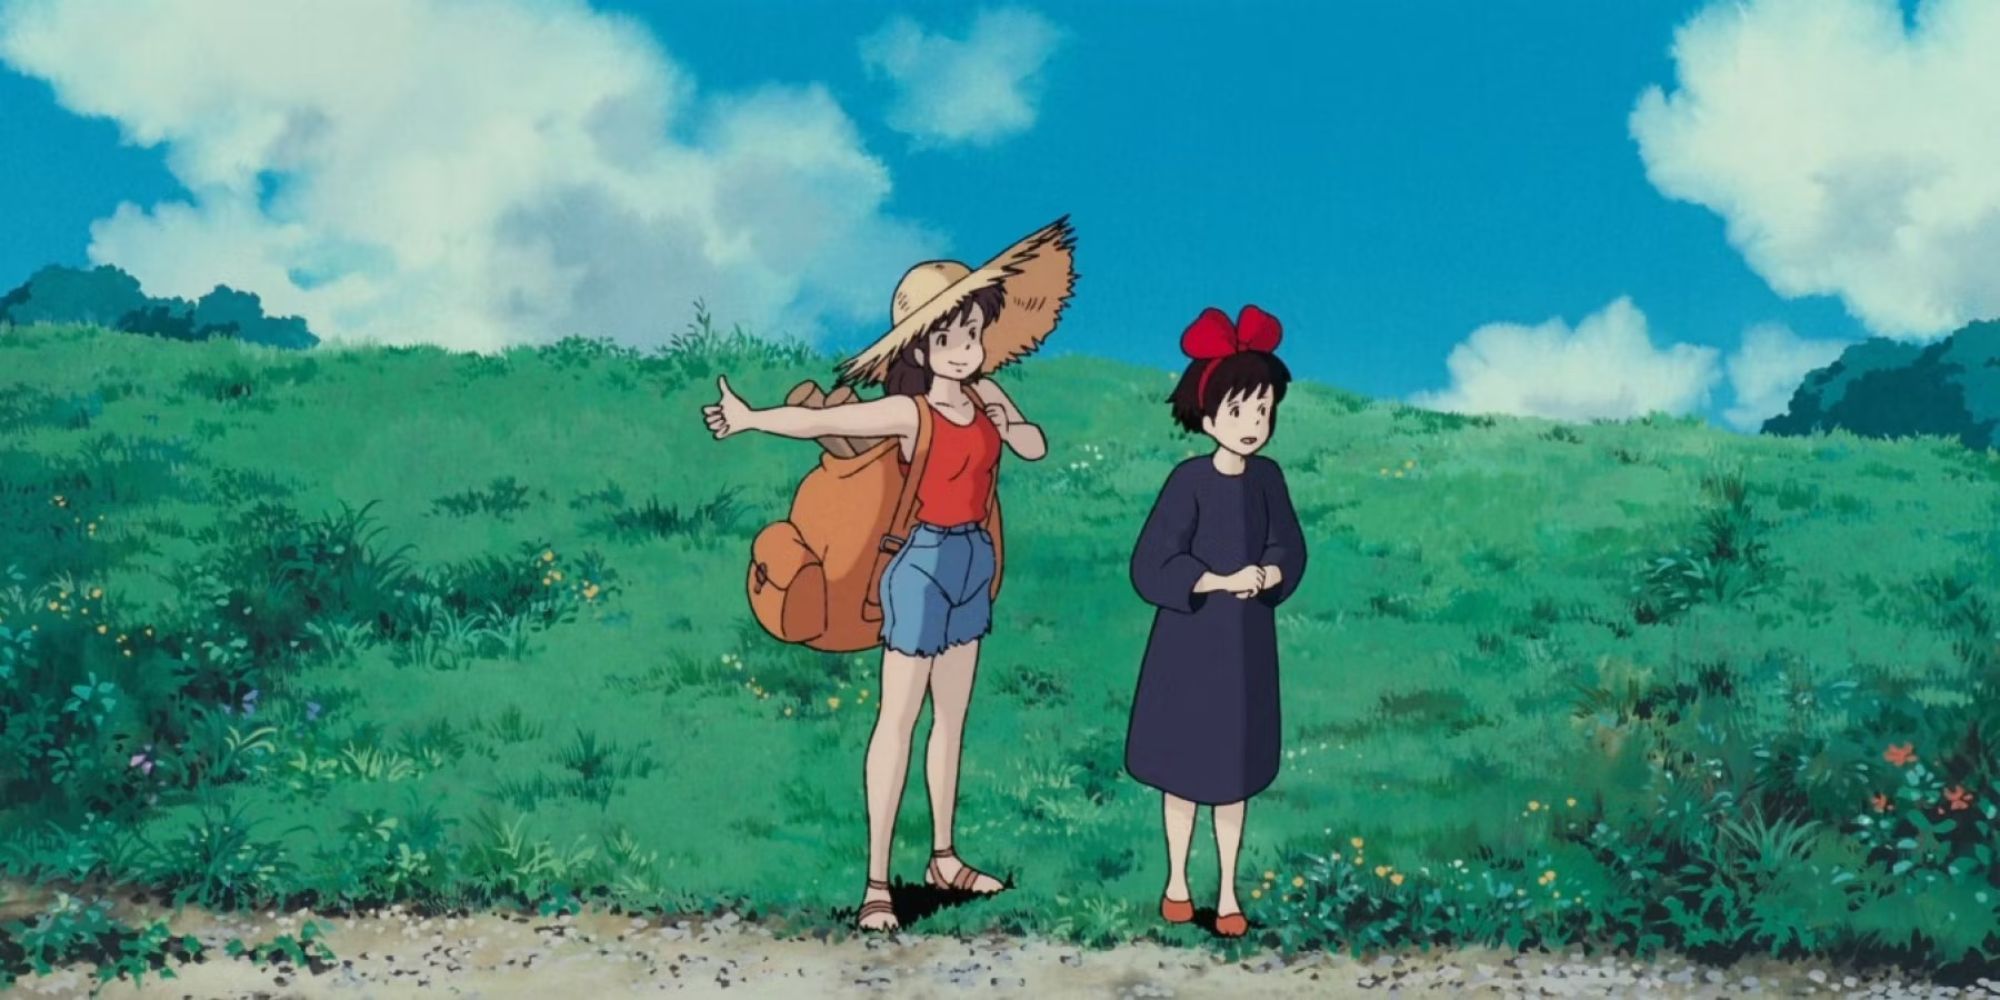 10 Studio Ghibli Movies That Deserve An Anime Series Spin-Off